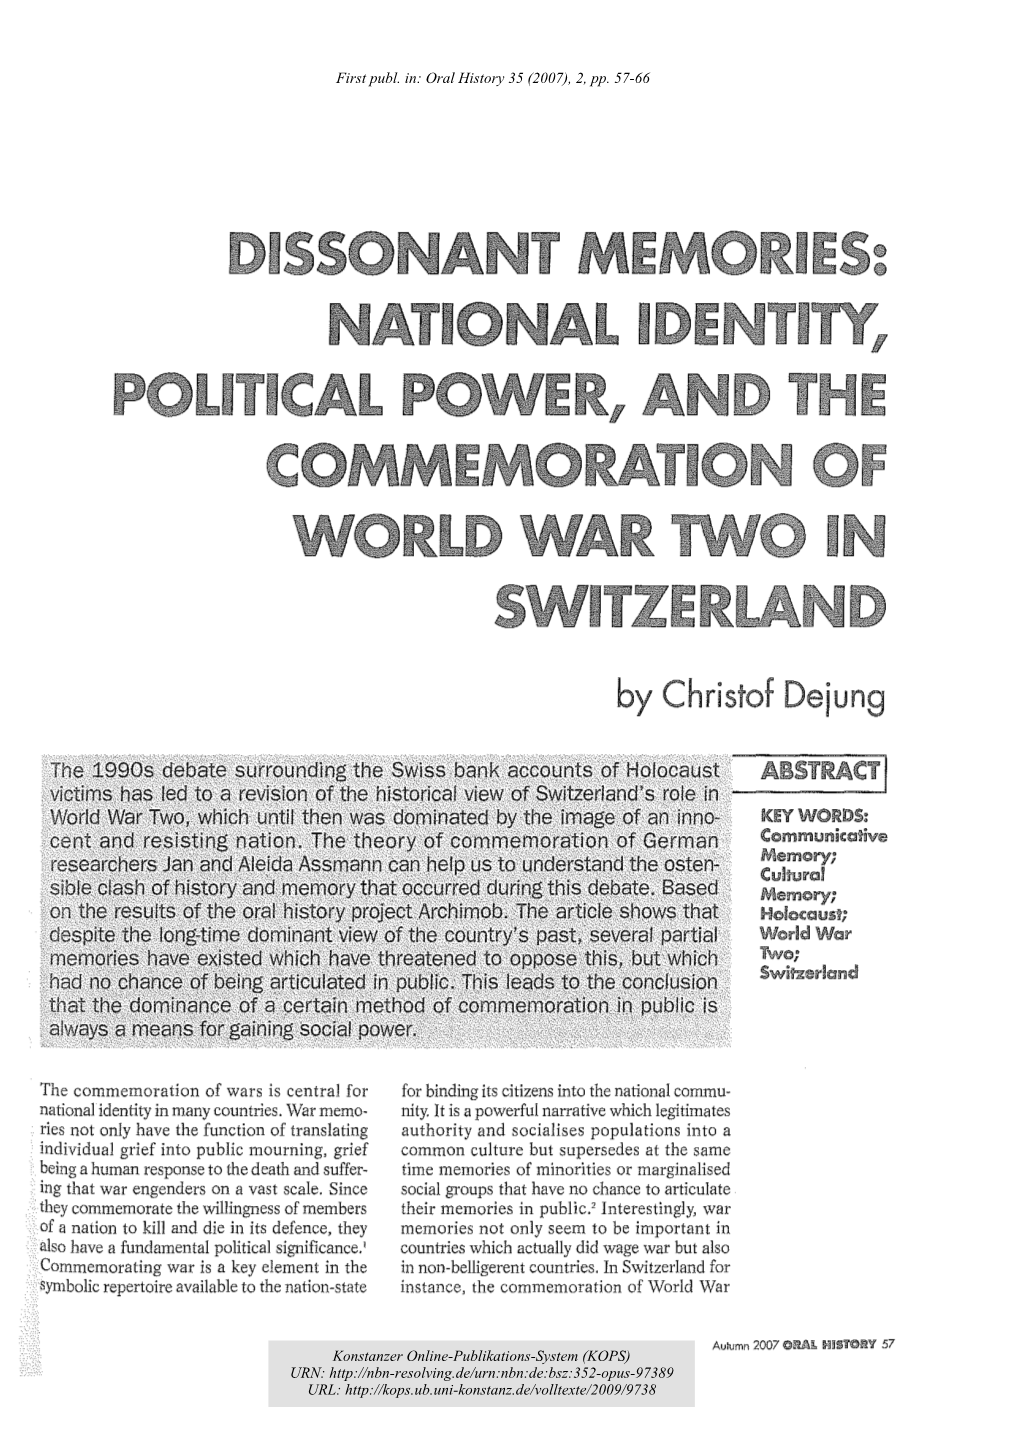 National Identity, Political Power, and the Commemoration of World War